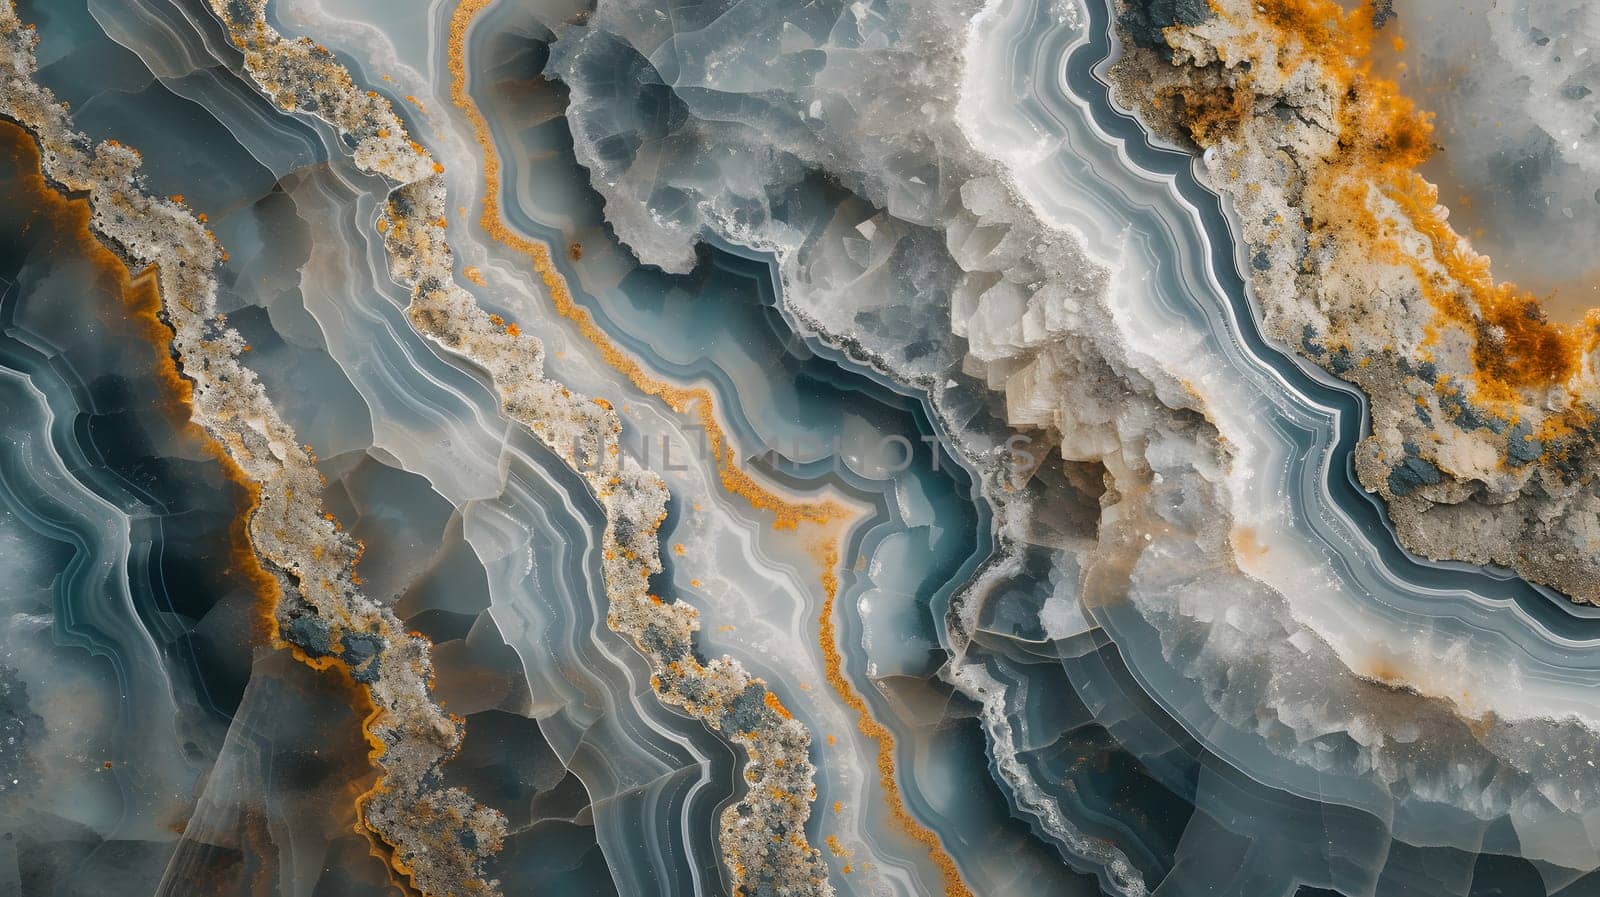 Geode rock texture, background and wallpaper. Neural network generated image. Not based on any actual scene or pattern.